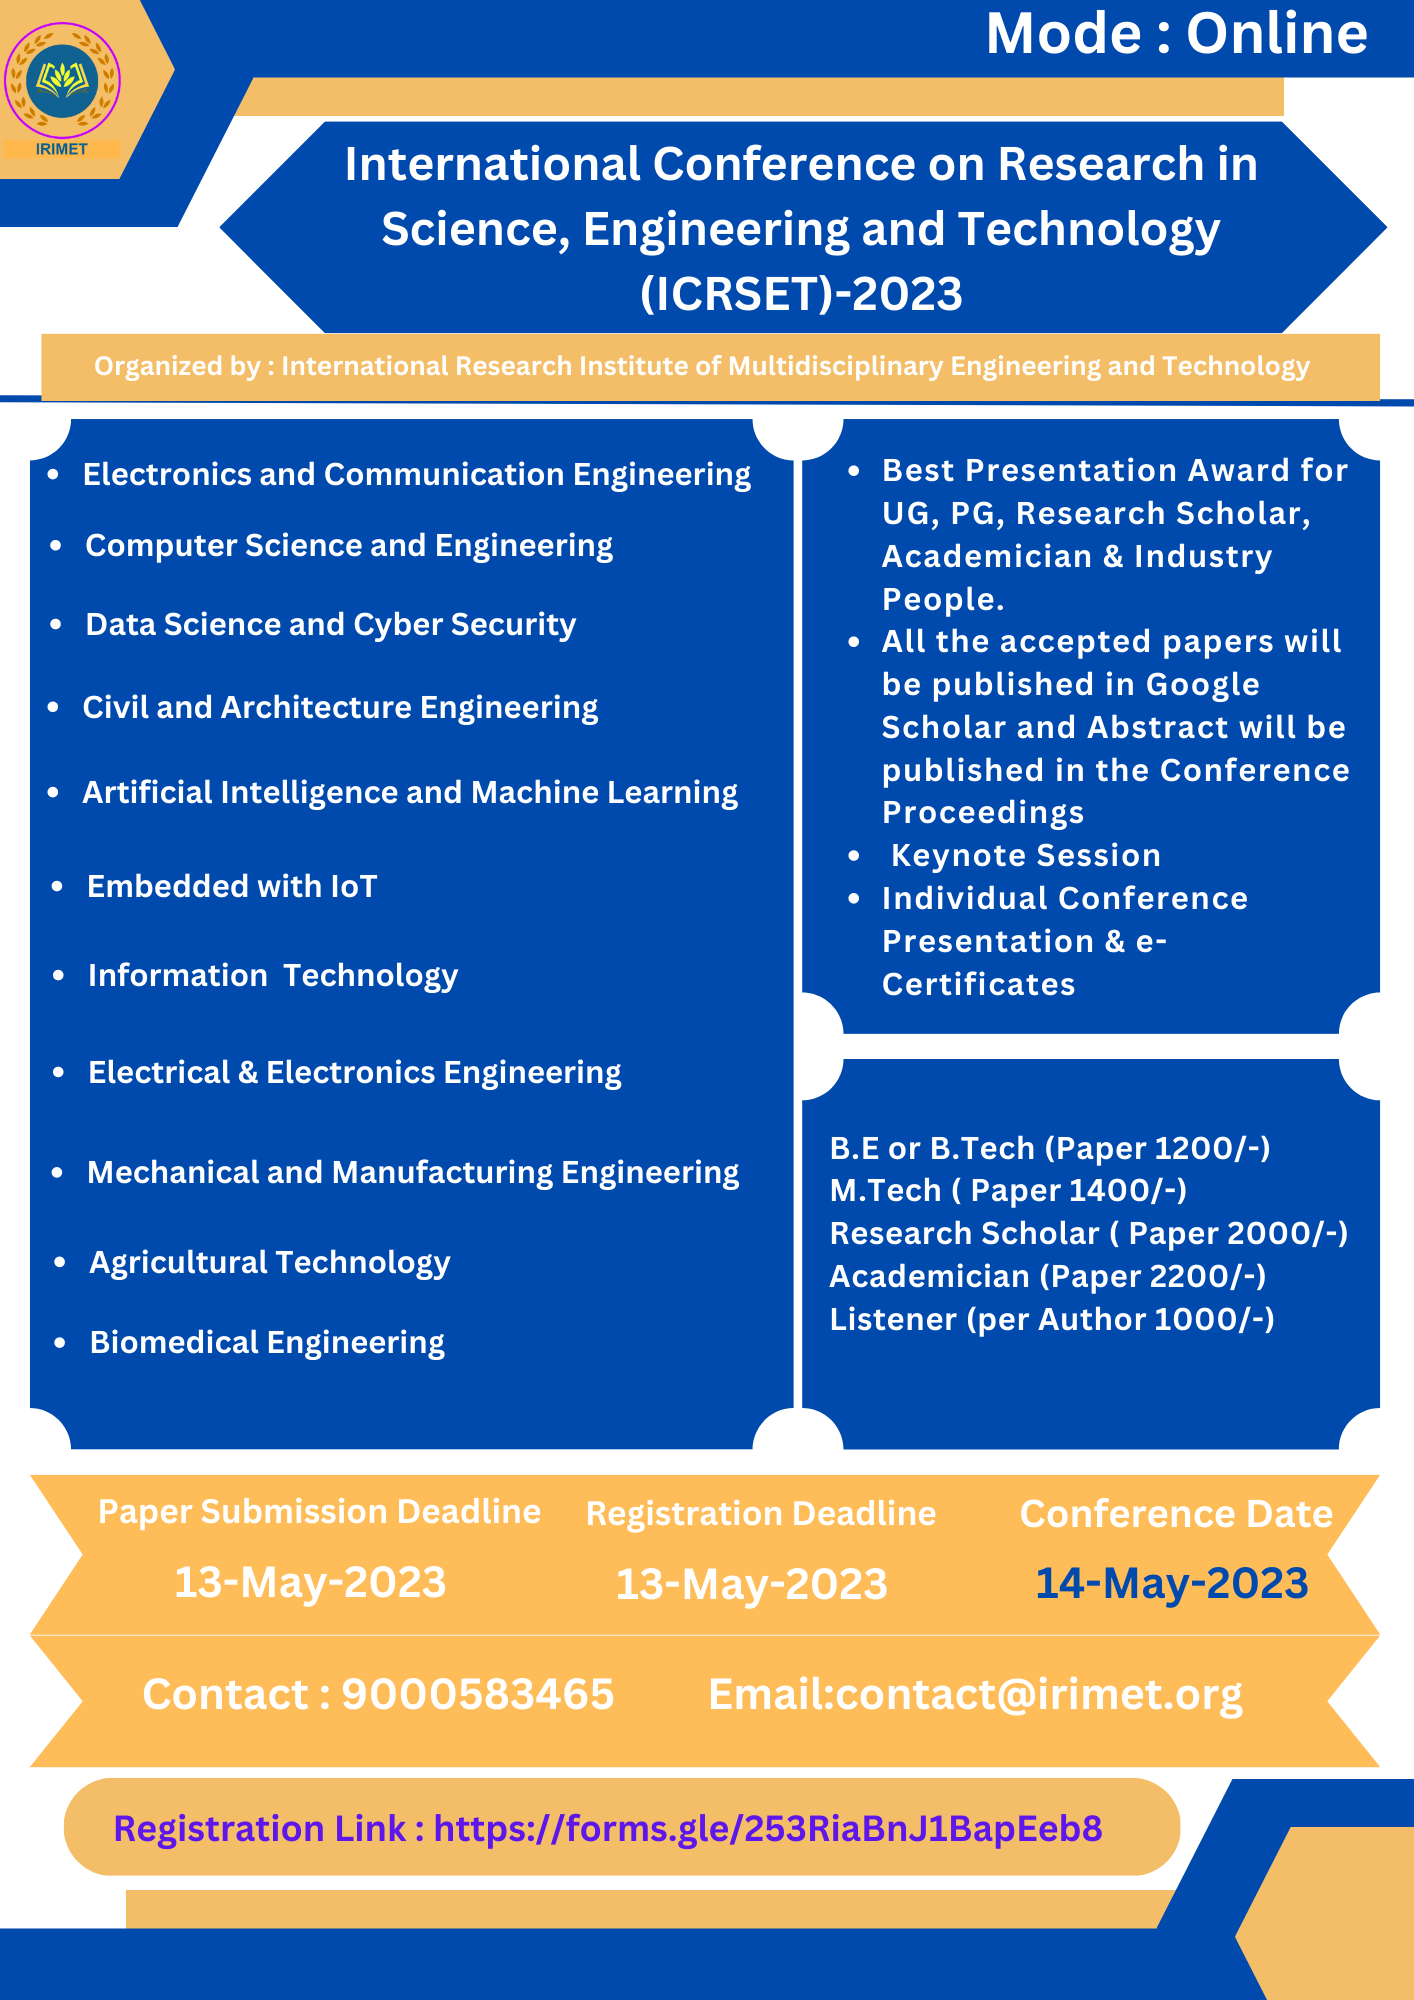 International Conference on Research in Science, Engineering and Technology (ICRSET) 2023